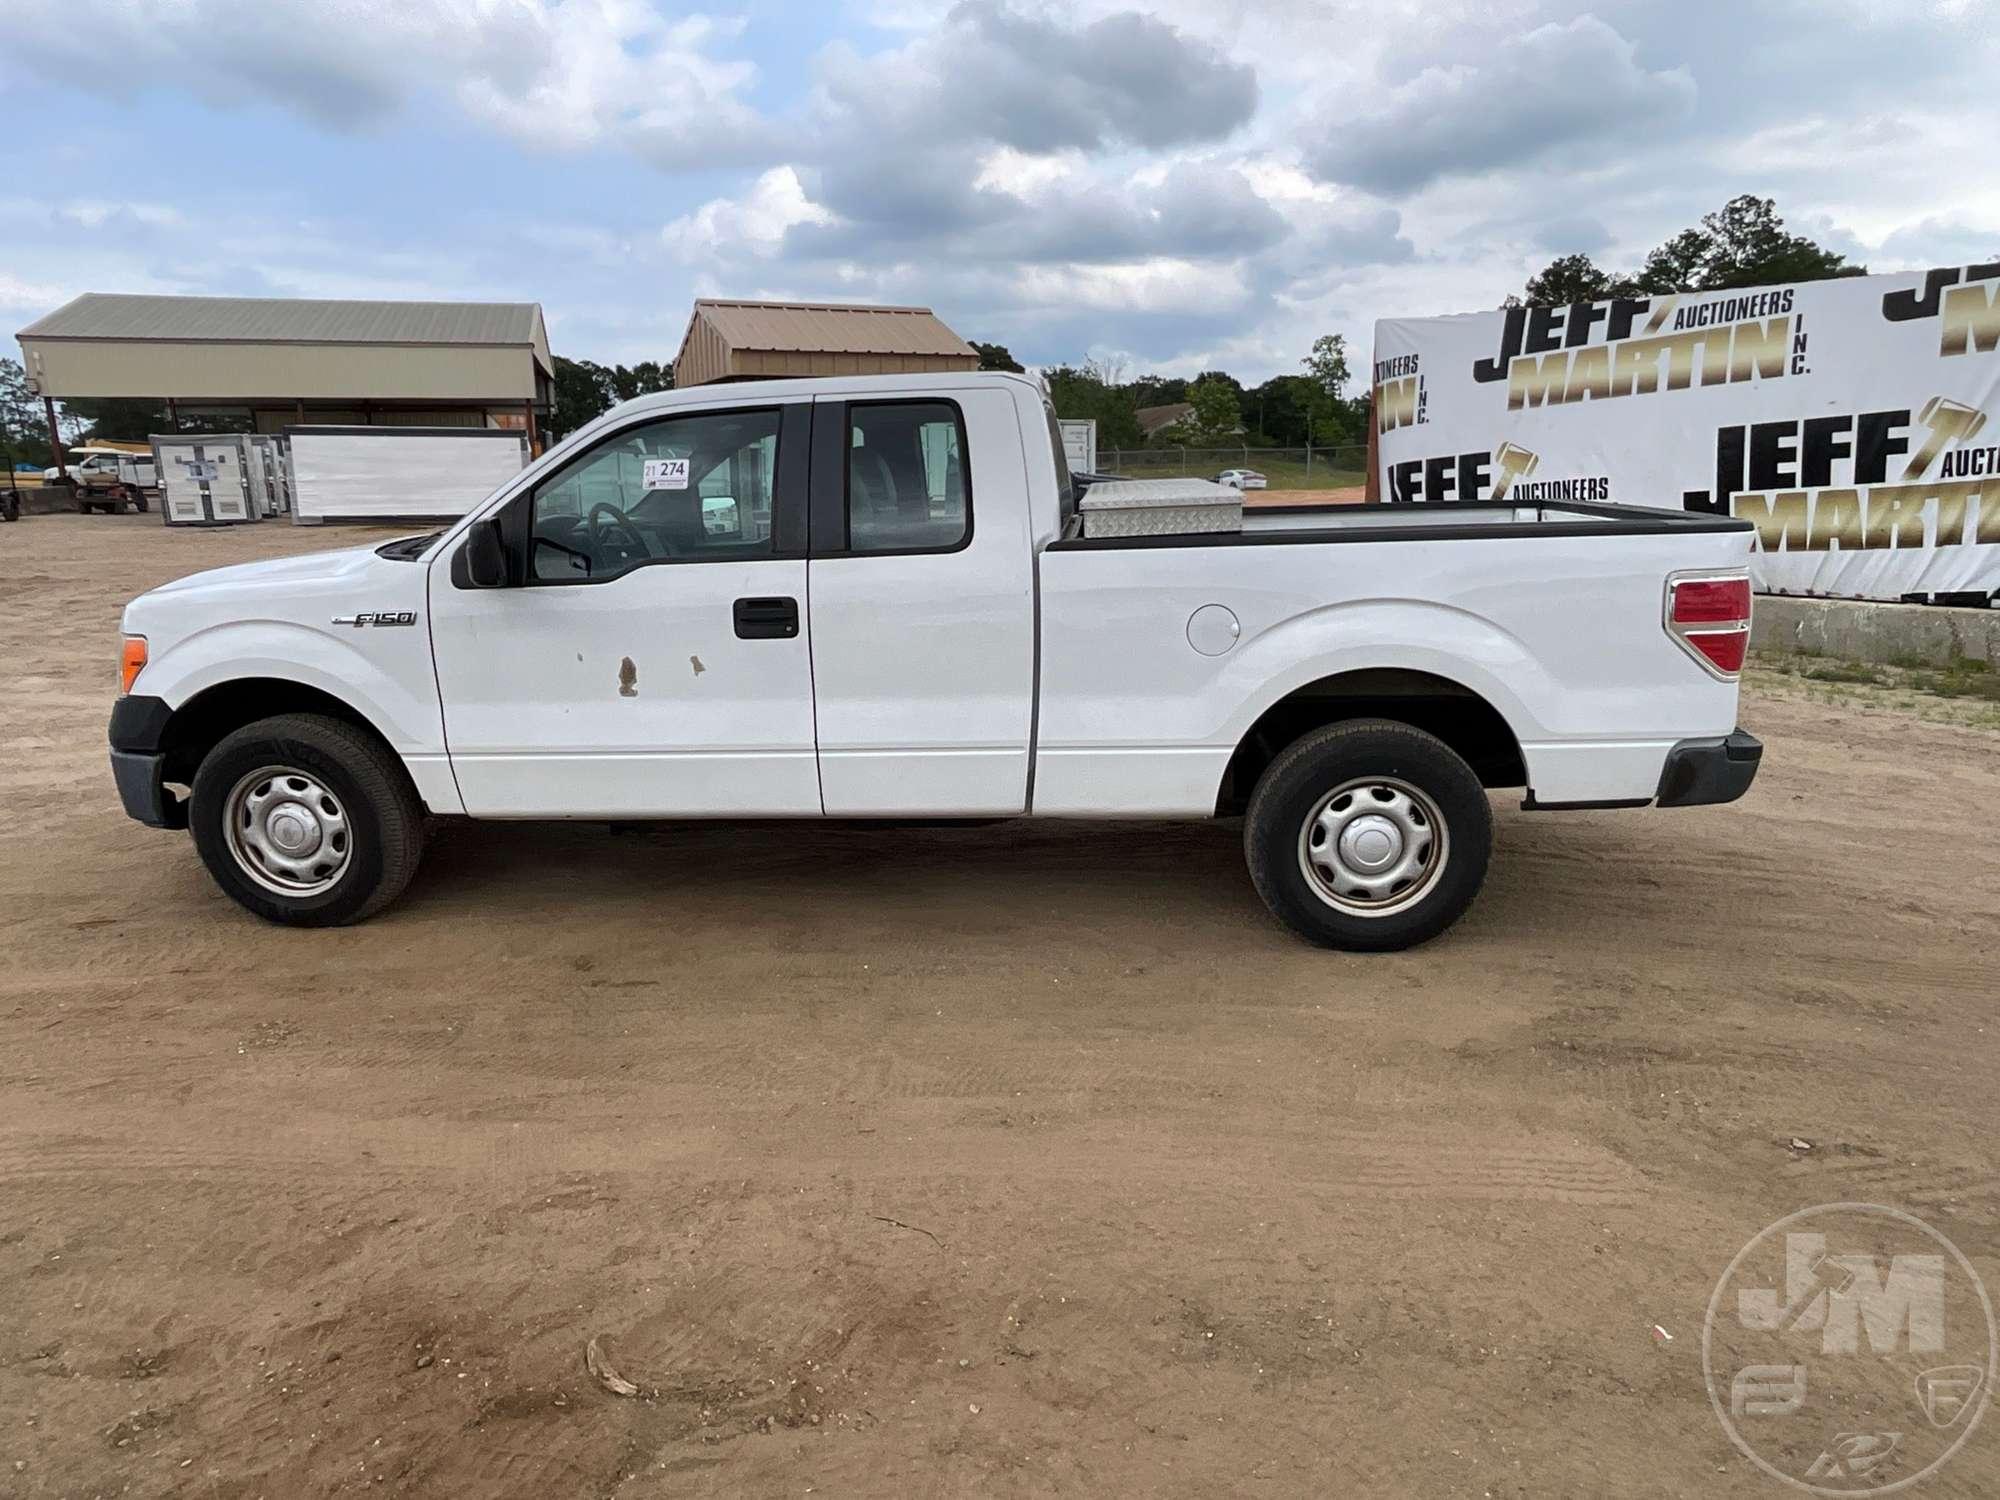 2011 FORD F-150 EXTENDED CAB PICKUP VIN: 1FTFX1CF1BFD15725